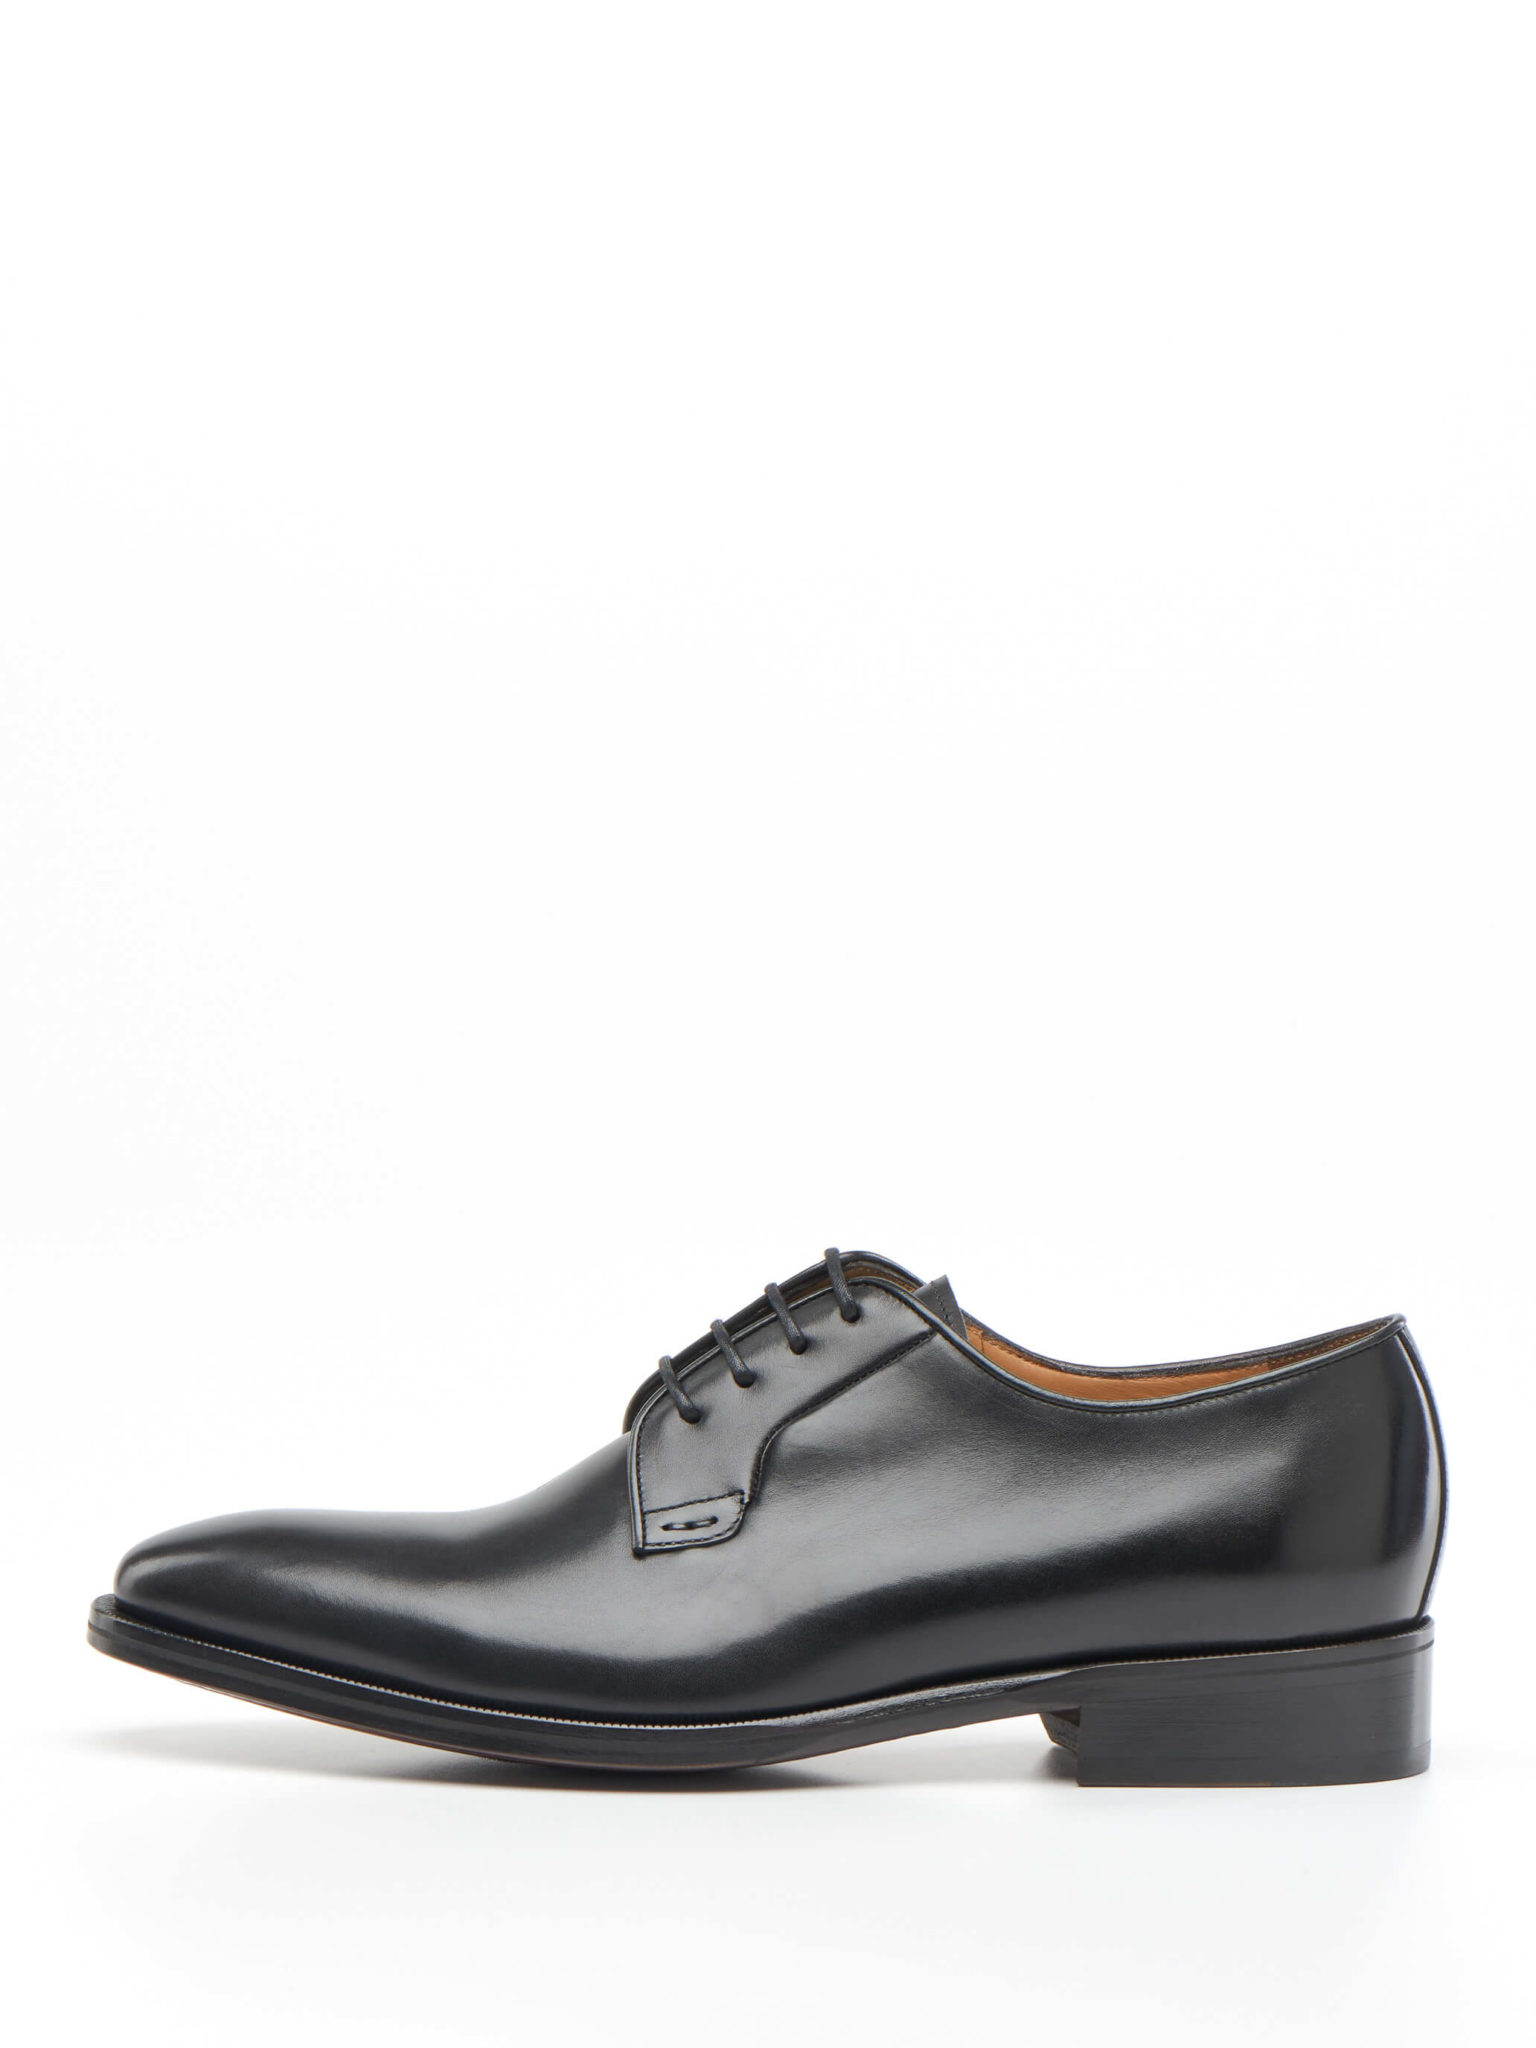 Brushed Oxford shoes - Luis Onofre - Portuguese Design Shoes